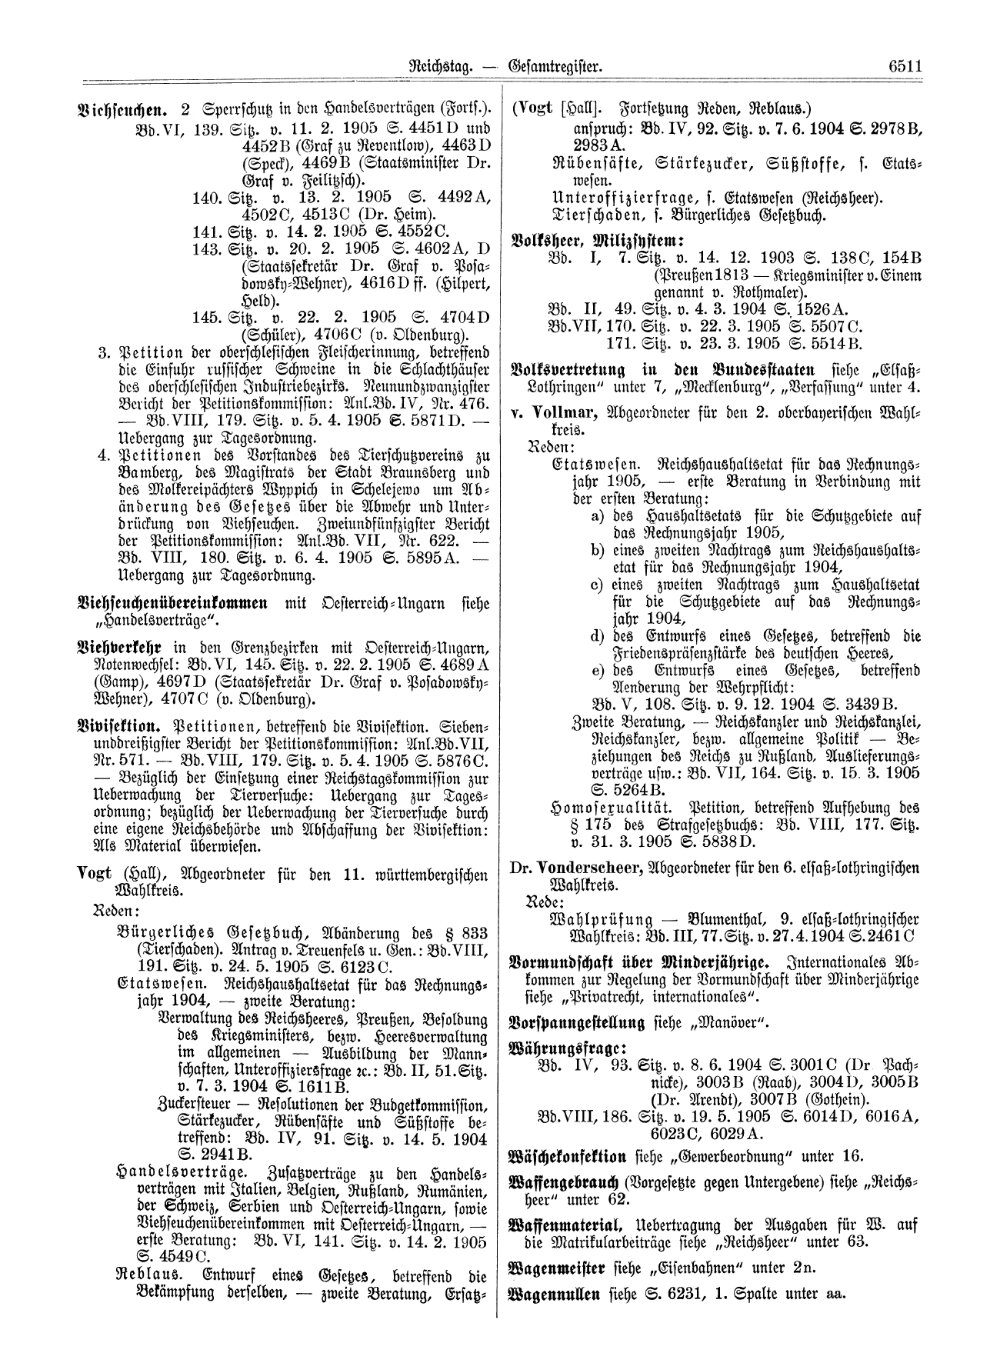 Scan of page 6511